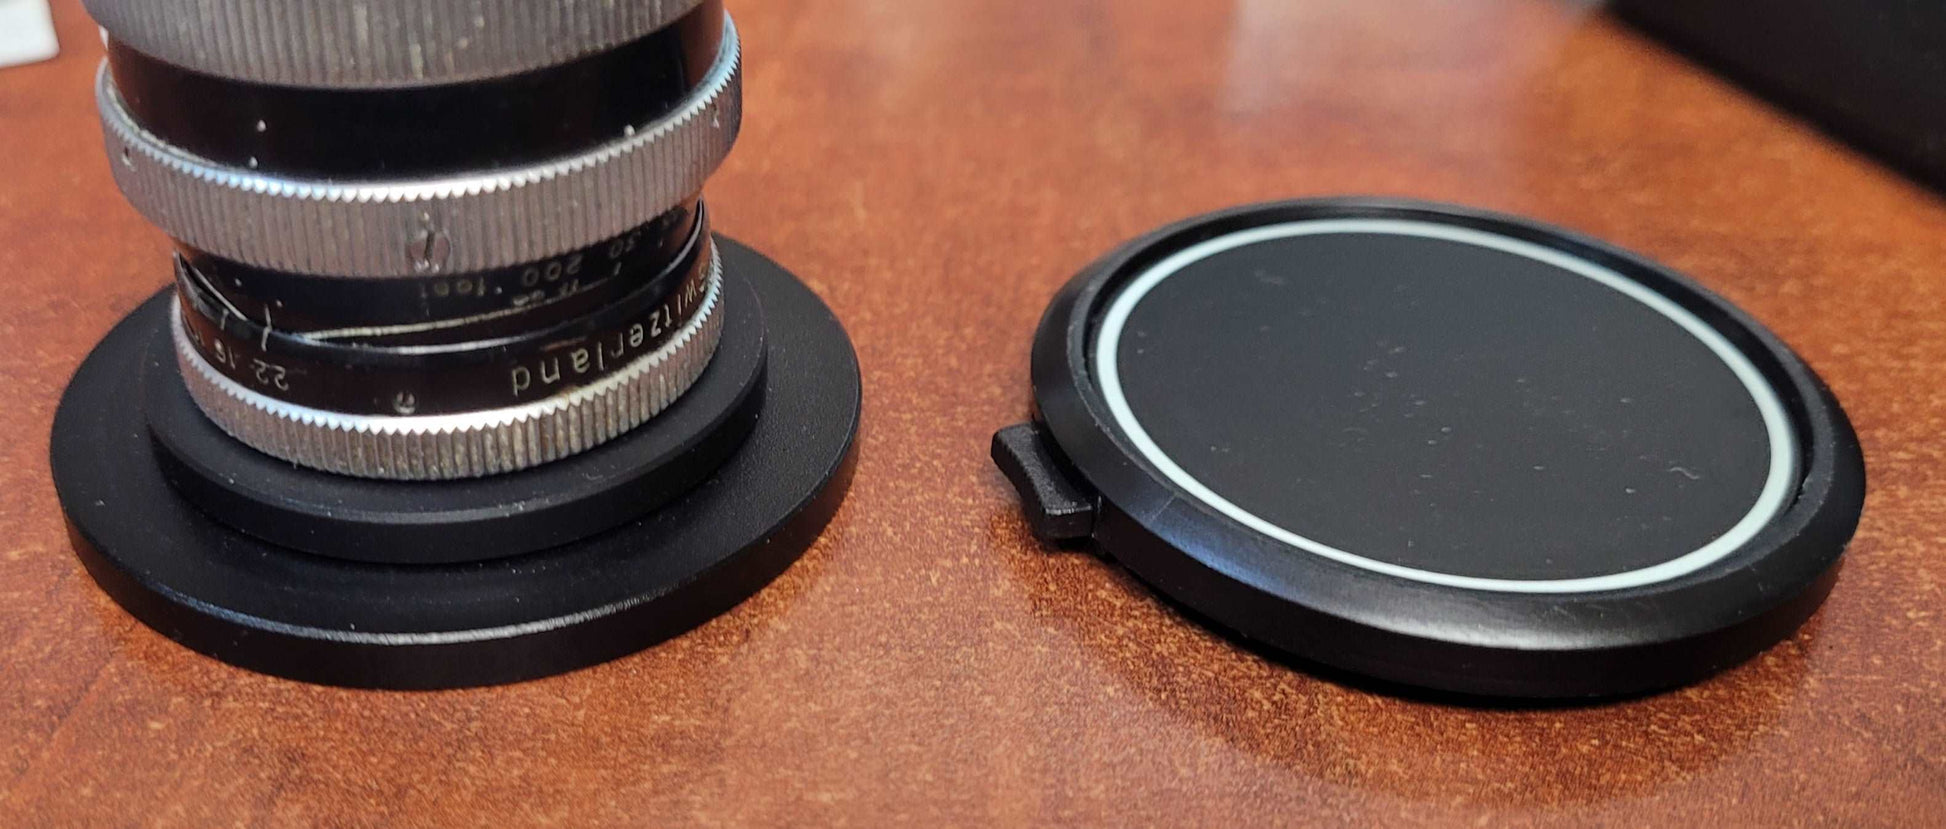 37mm-49mm Step up Ring Adapter